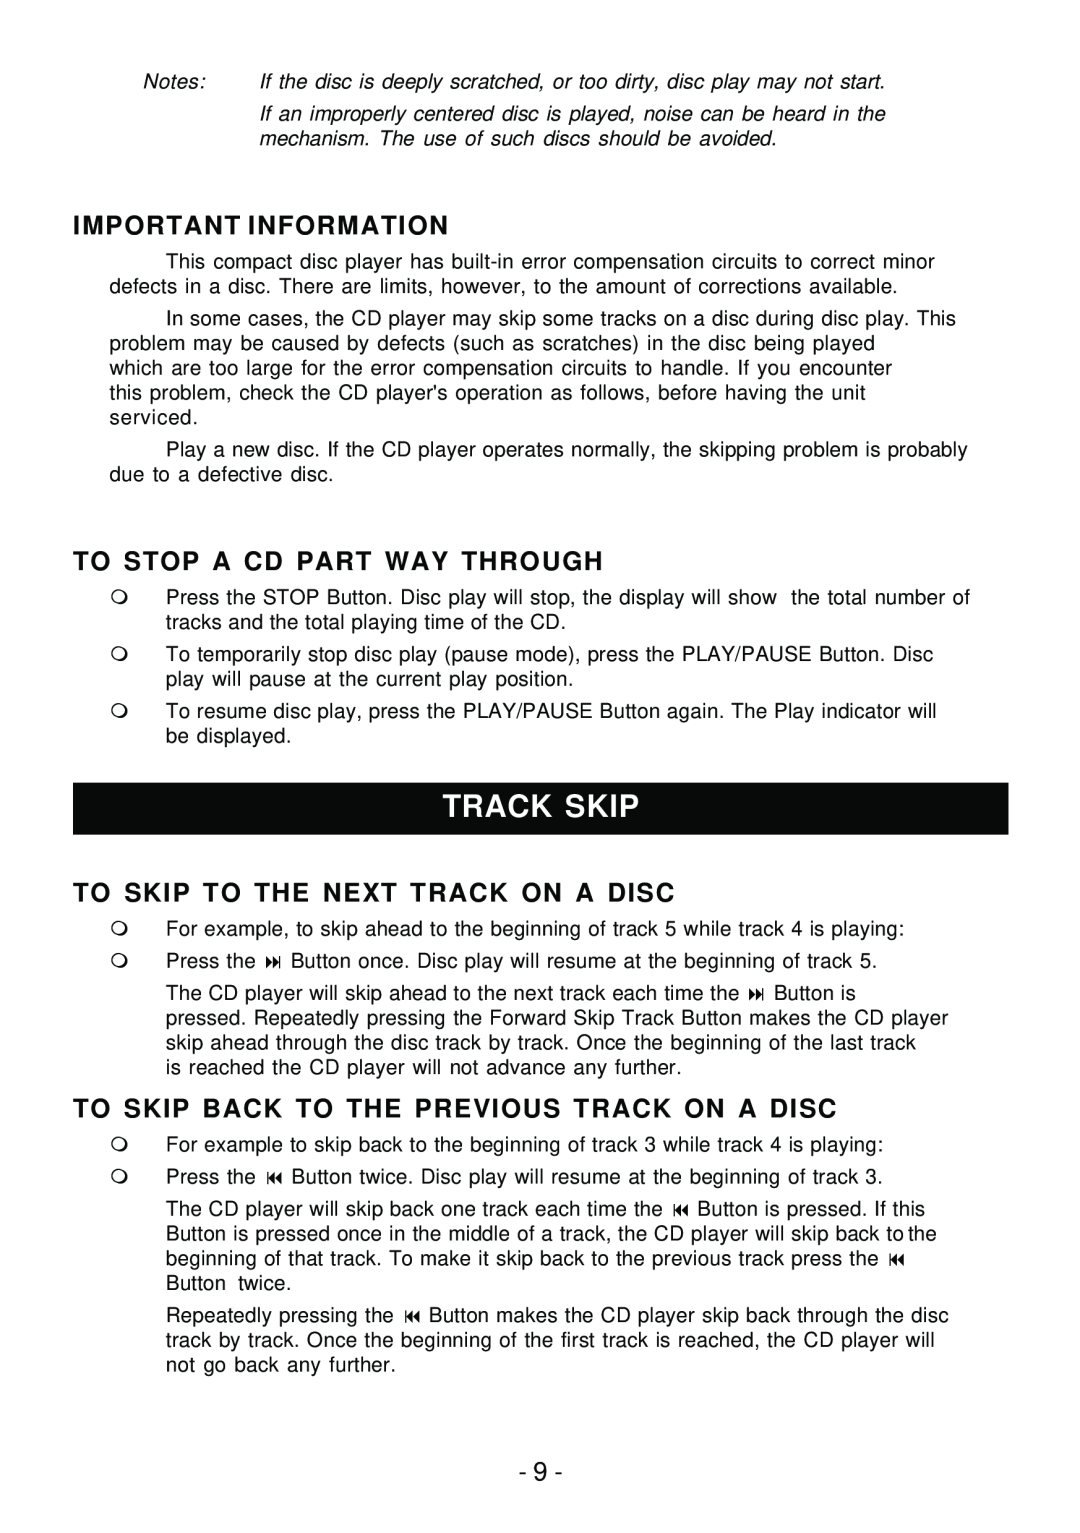 Sylvania SRCD858 Track Skip, Important Information, To Stop A Cd Part Way Through, To Skip To The Next Track On A Disc 